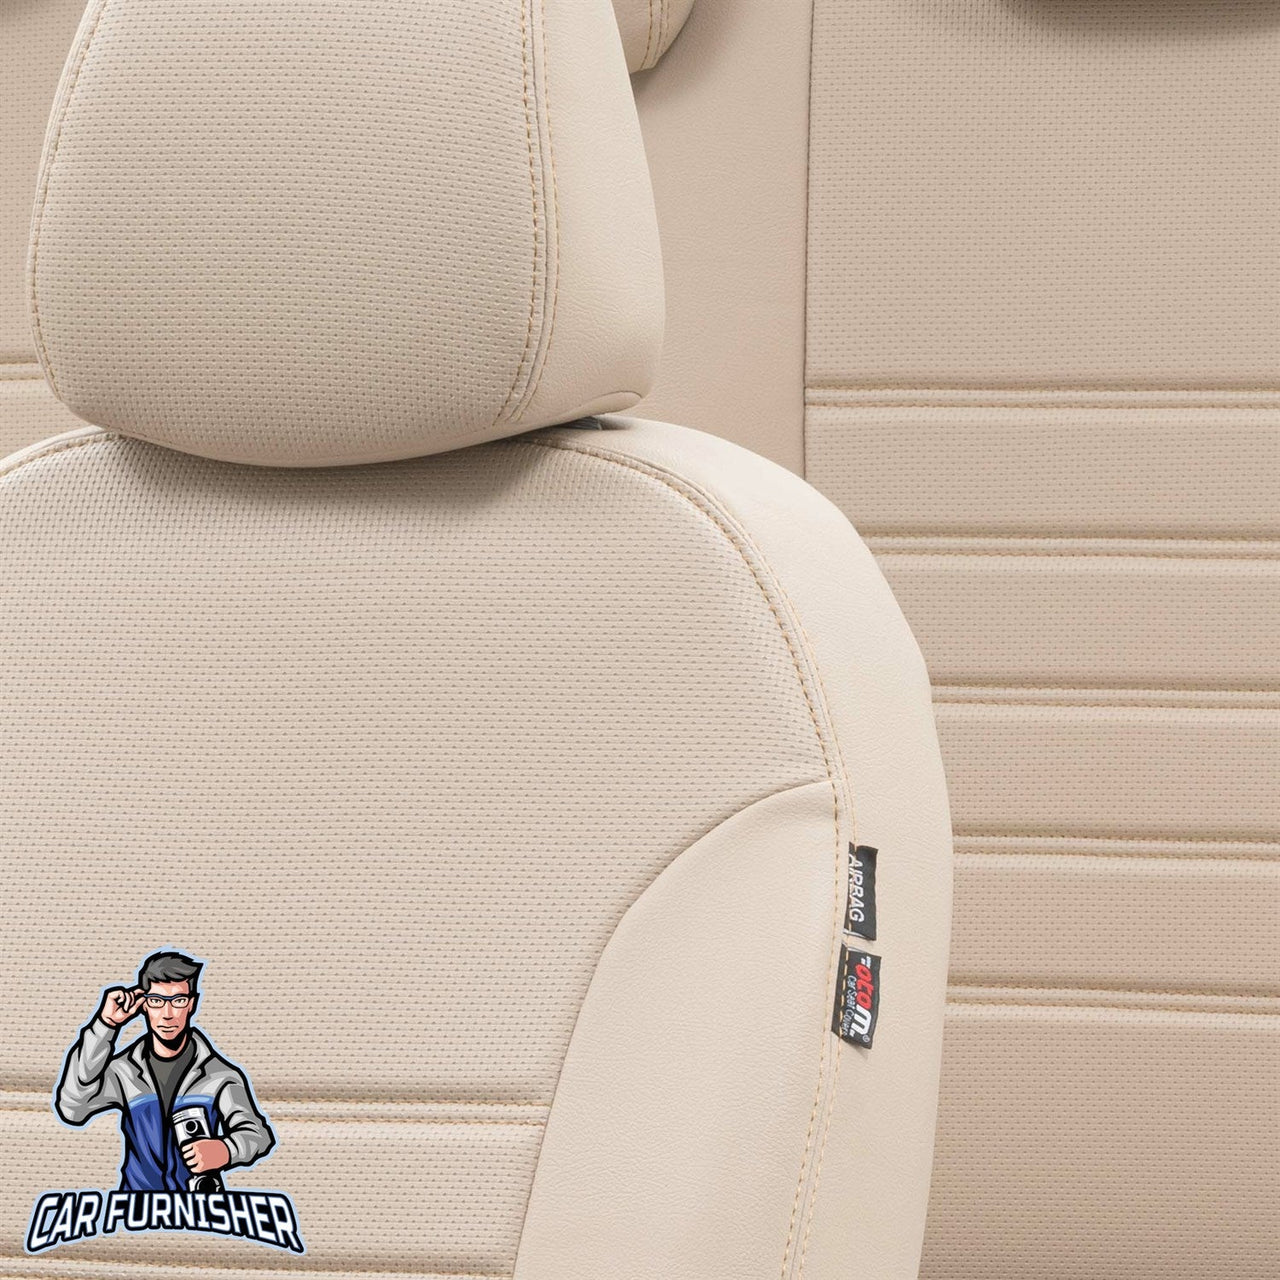 Jeep Grand Cherokee Seat Cover New York Leather Design Beige Leather